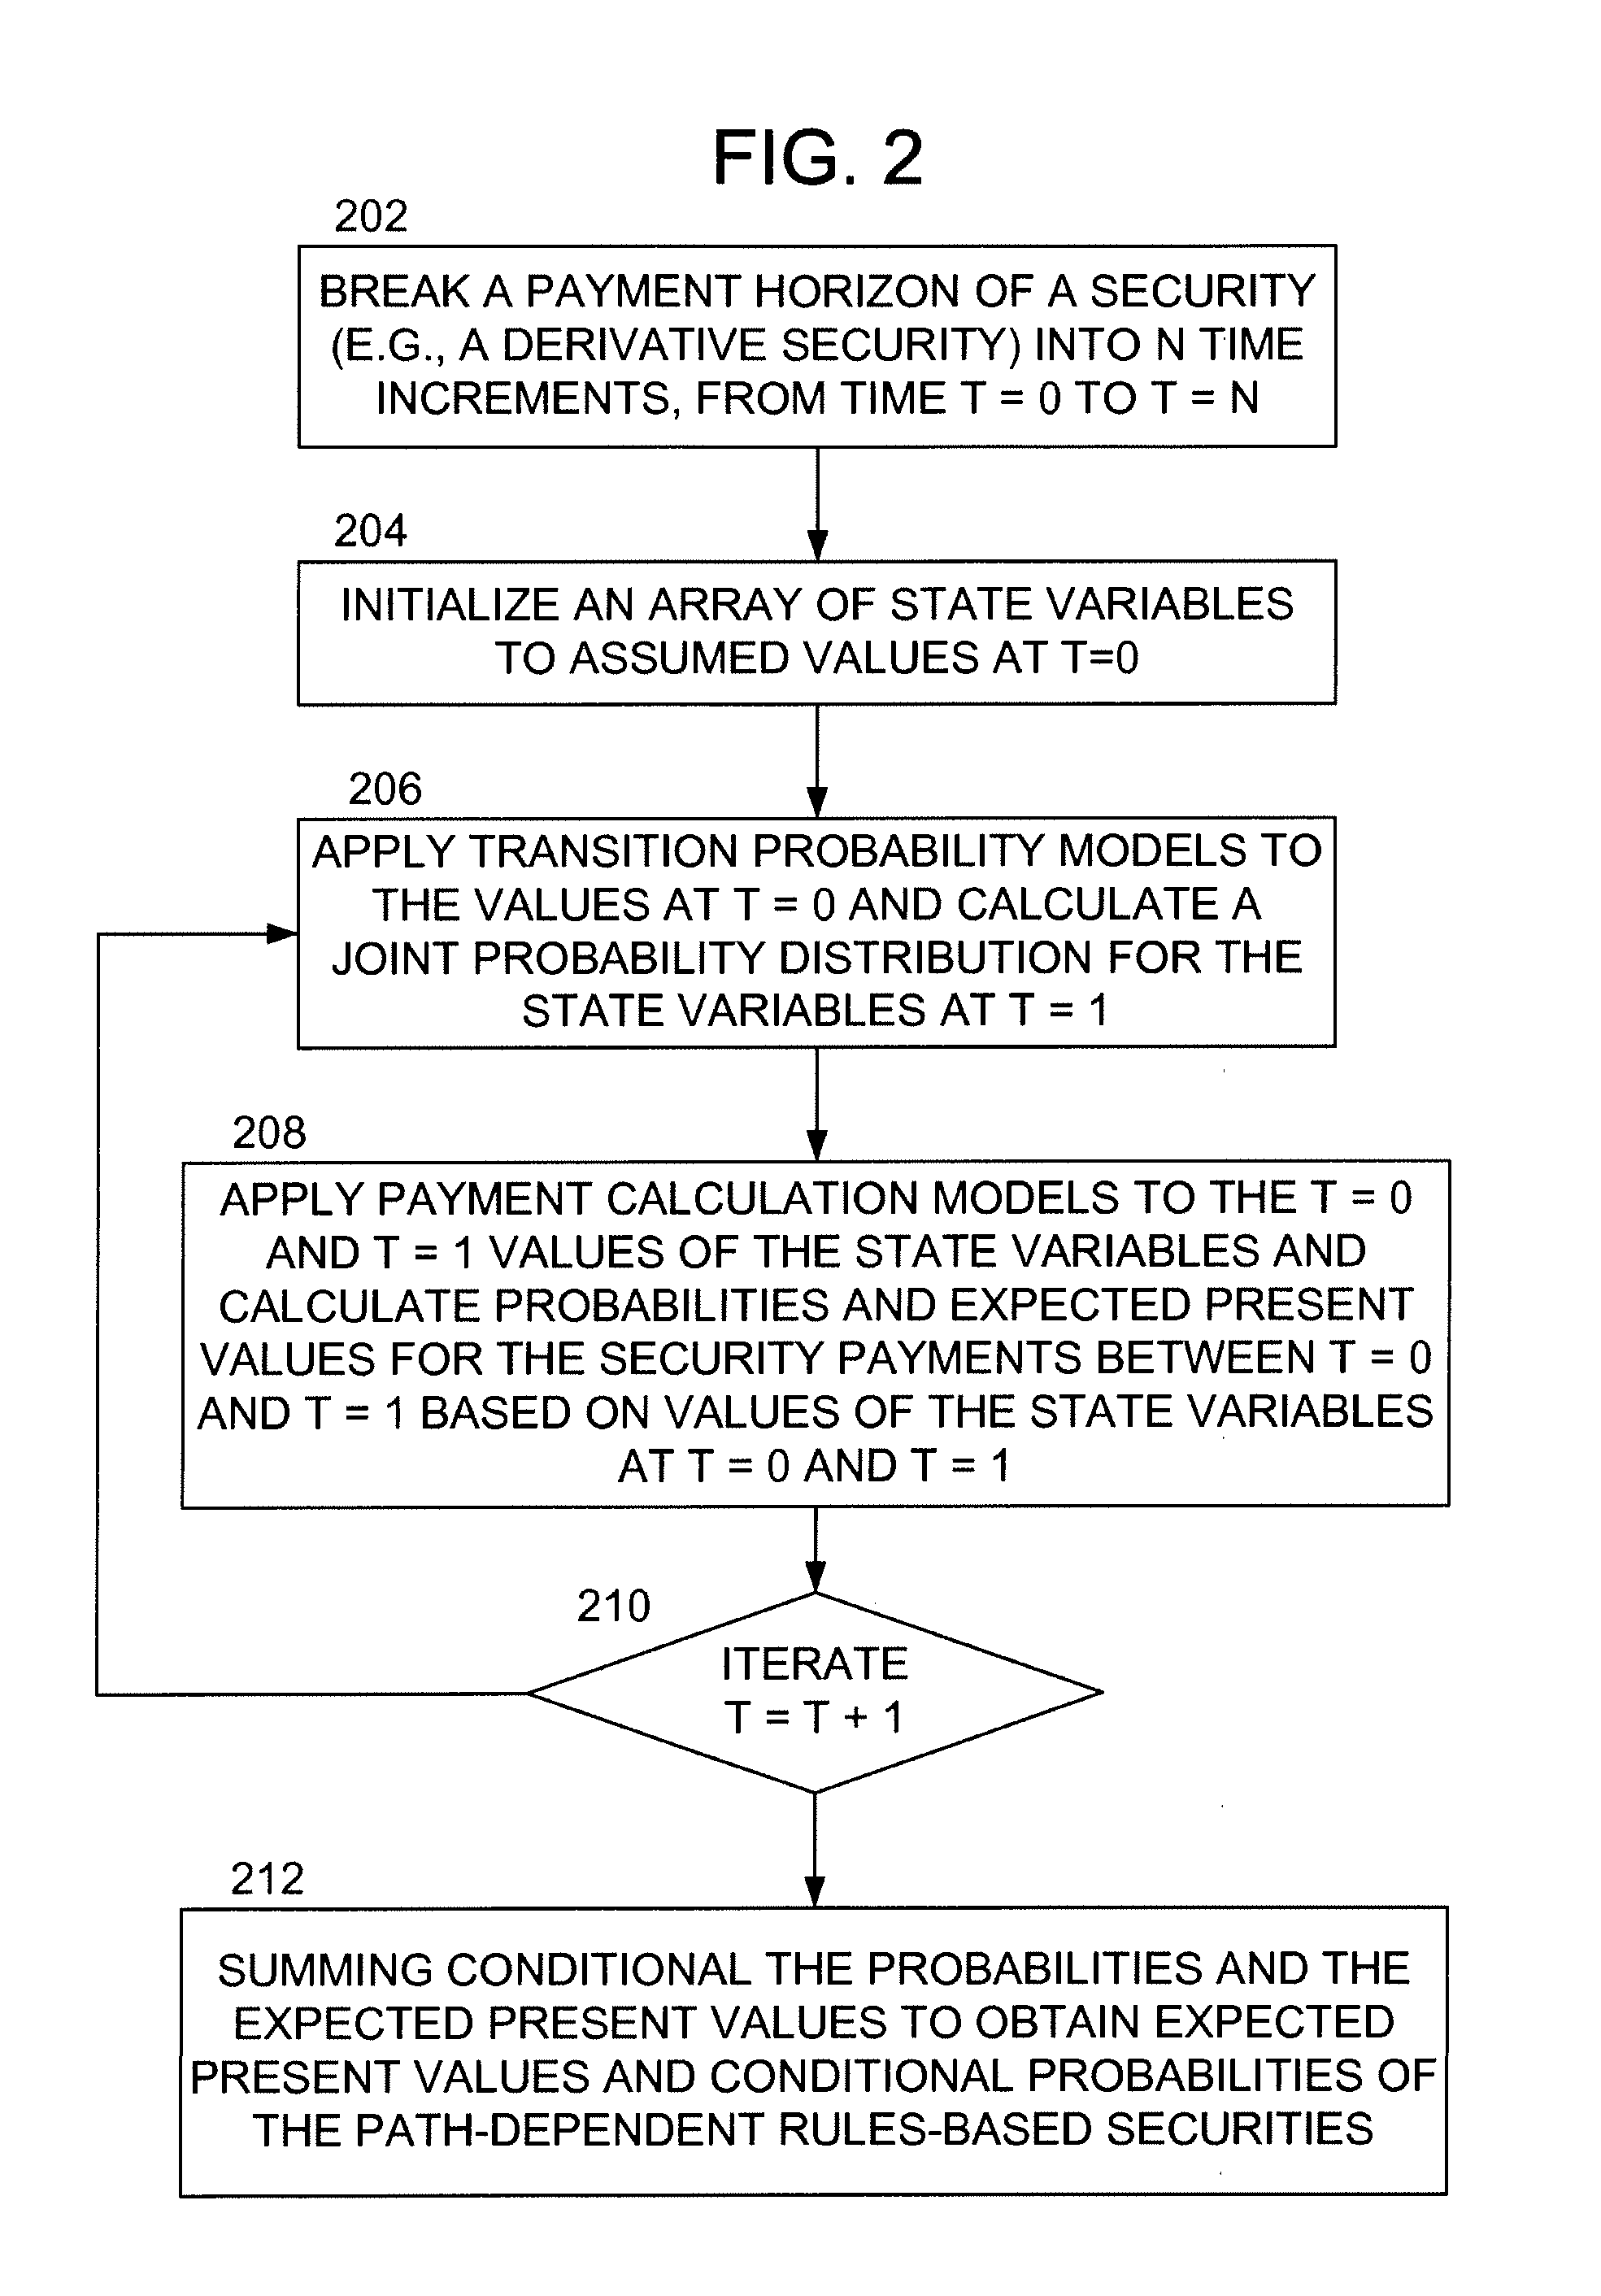 Methods and apparatus for iterative conditional probability calculation methods for financial instruments with path-dependent payment structures